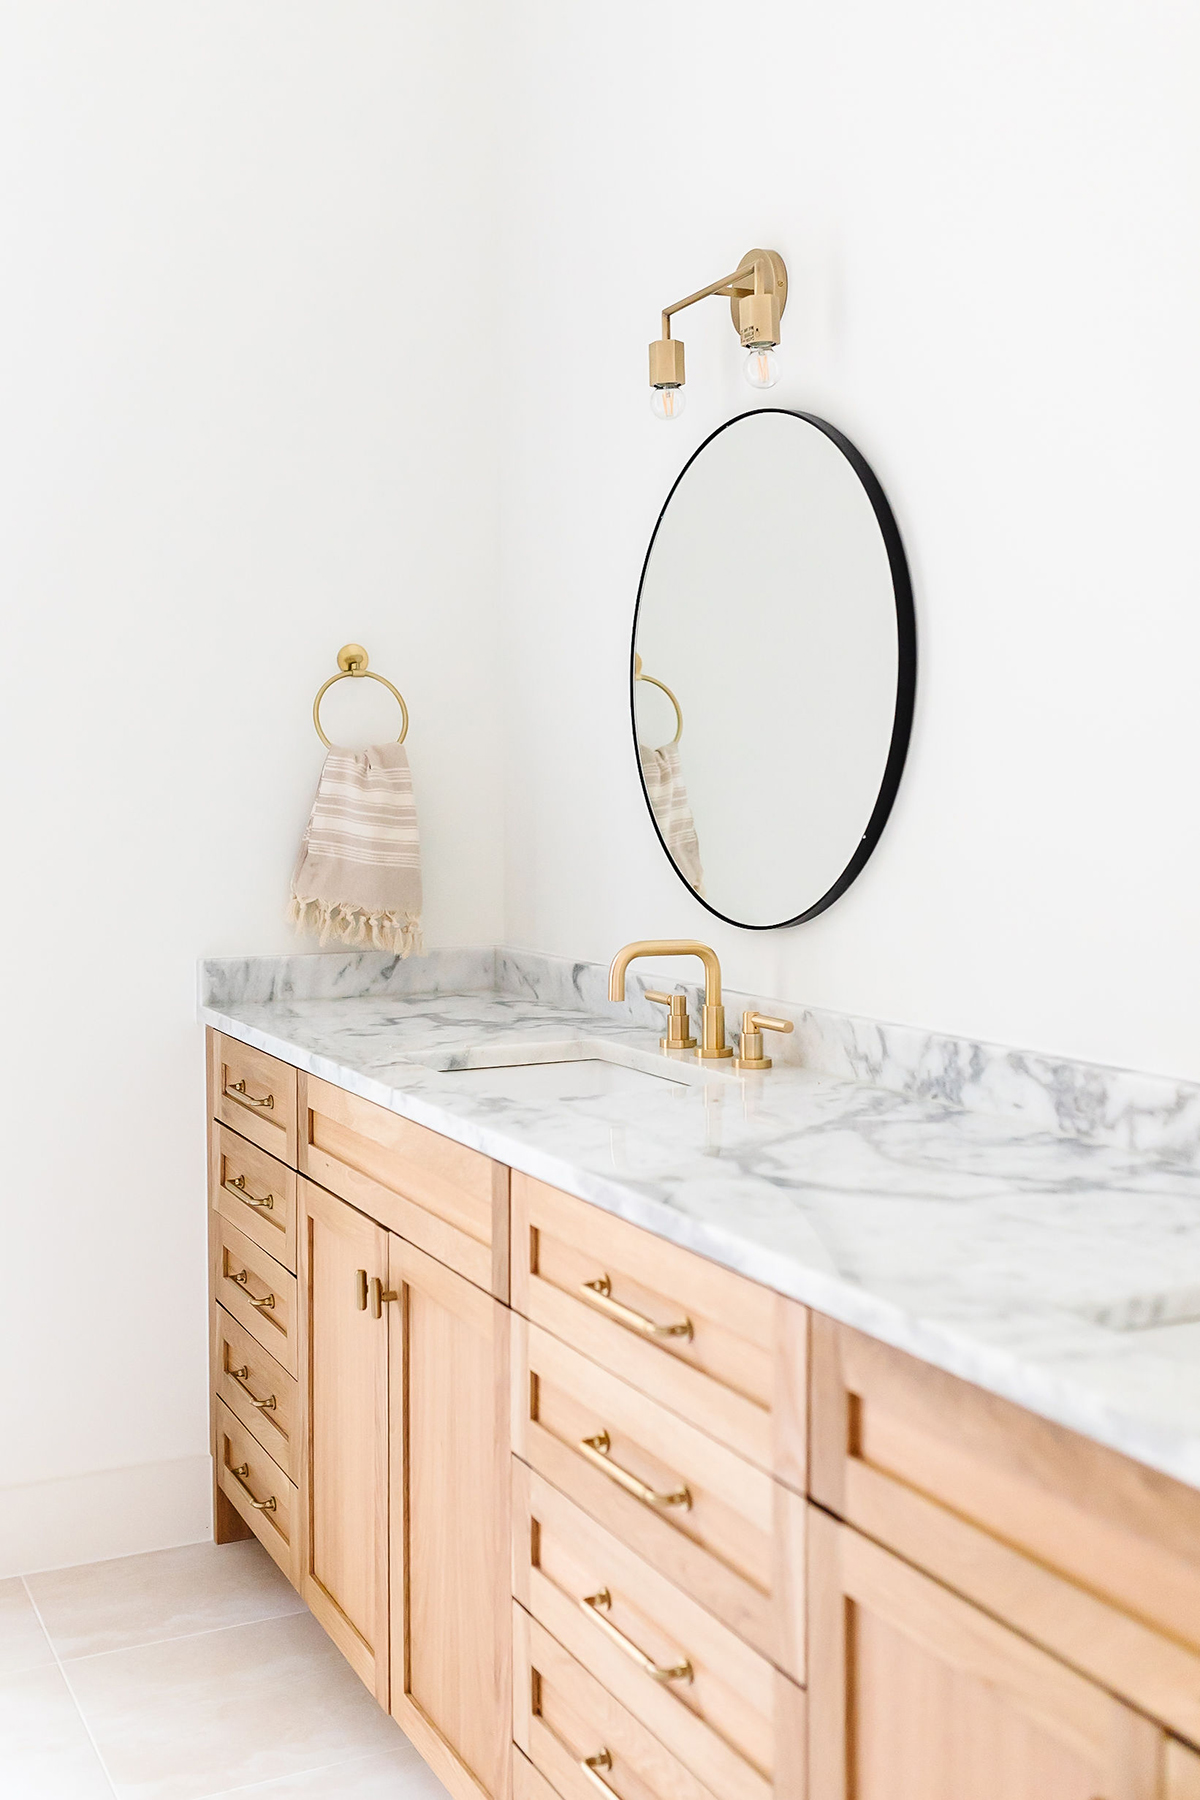 Stock image of a vanity to show a bathrooms have a high ROI for renovations when selling.